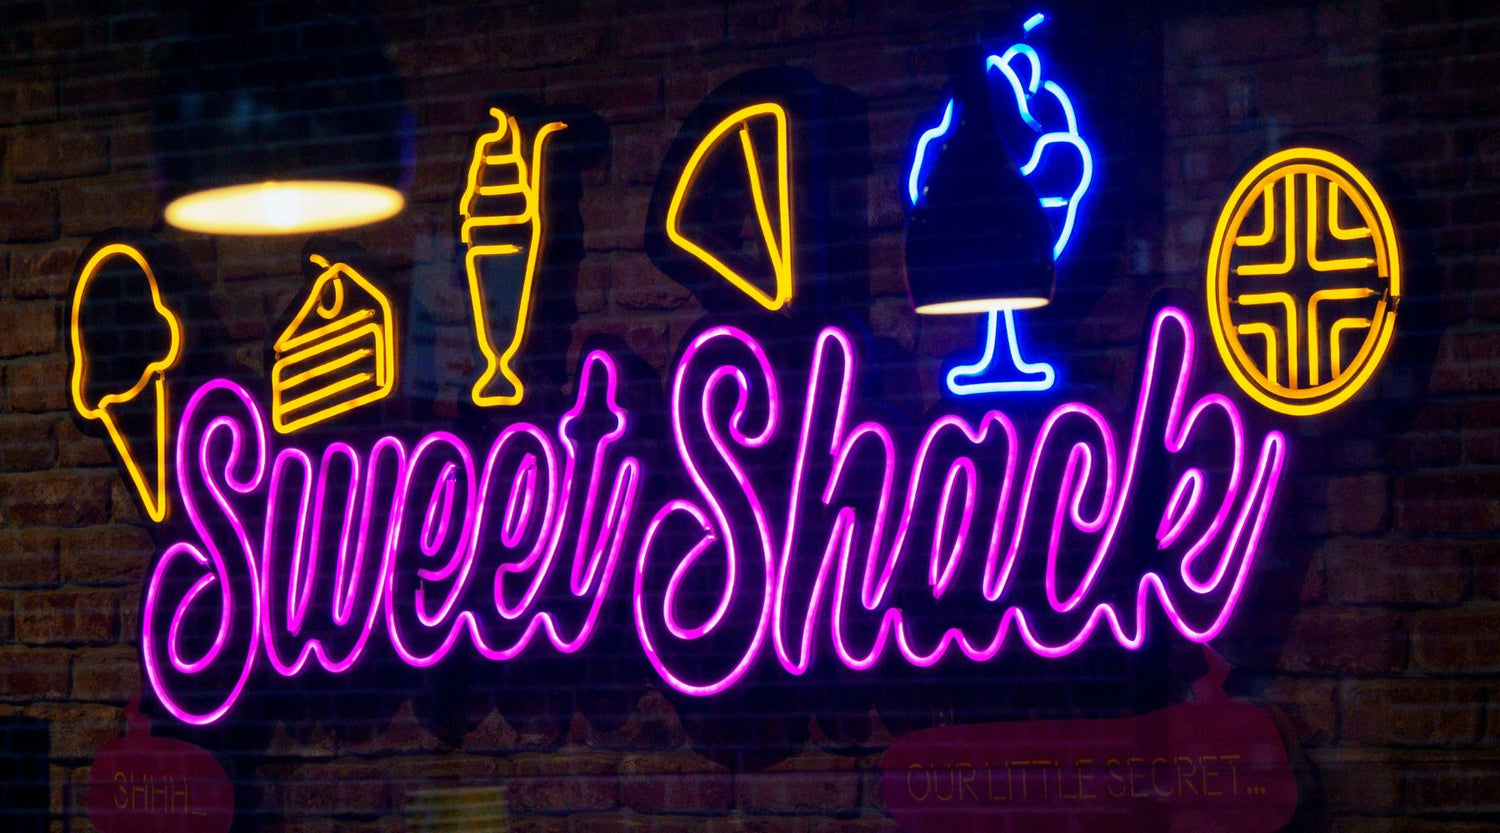 LED Neon Signs vs. Wall Art: Which is Better for Decor?